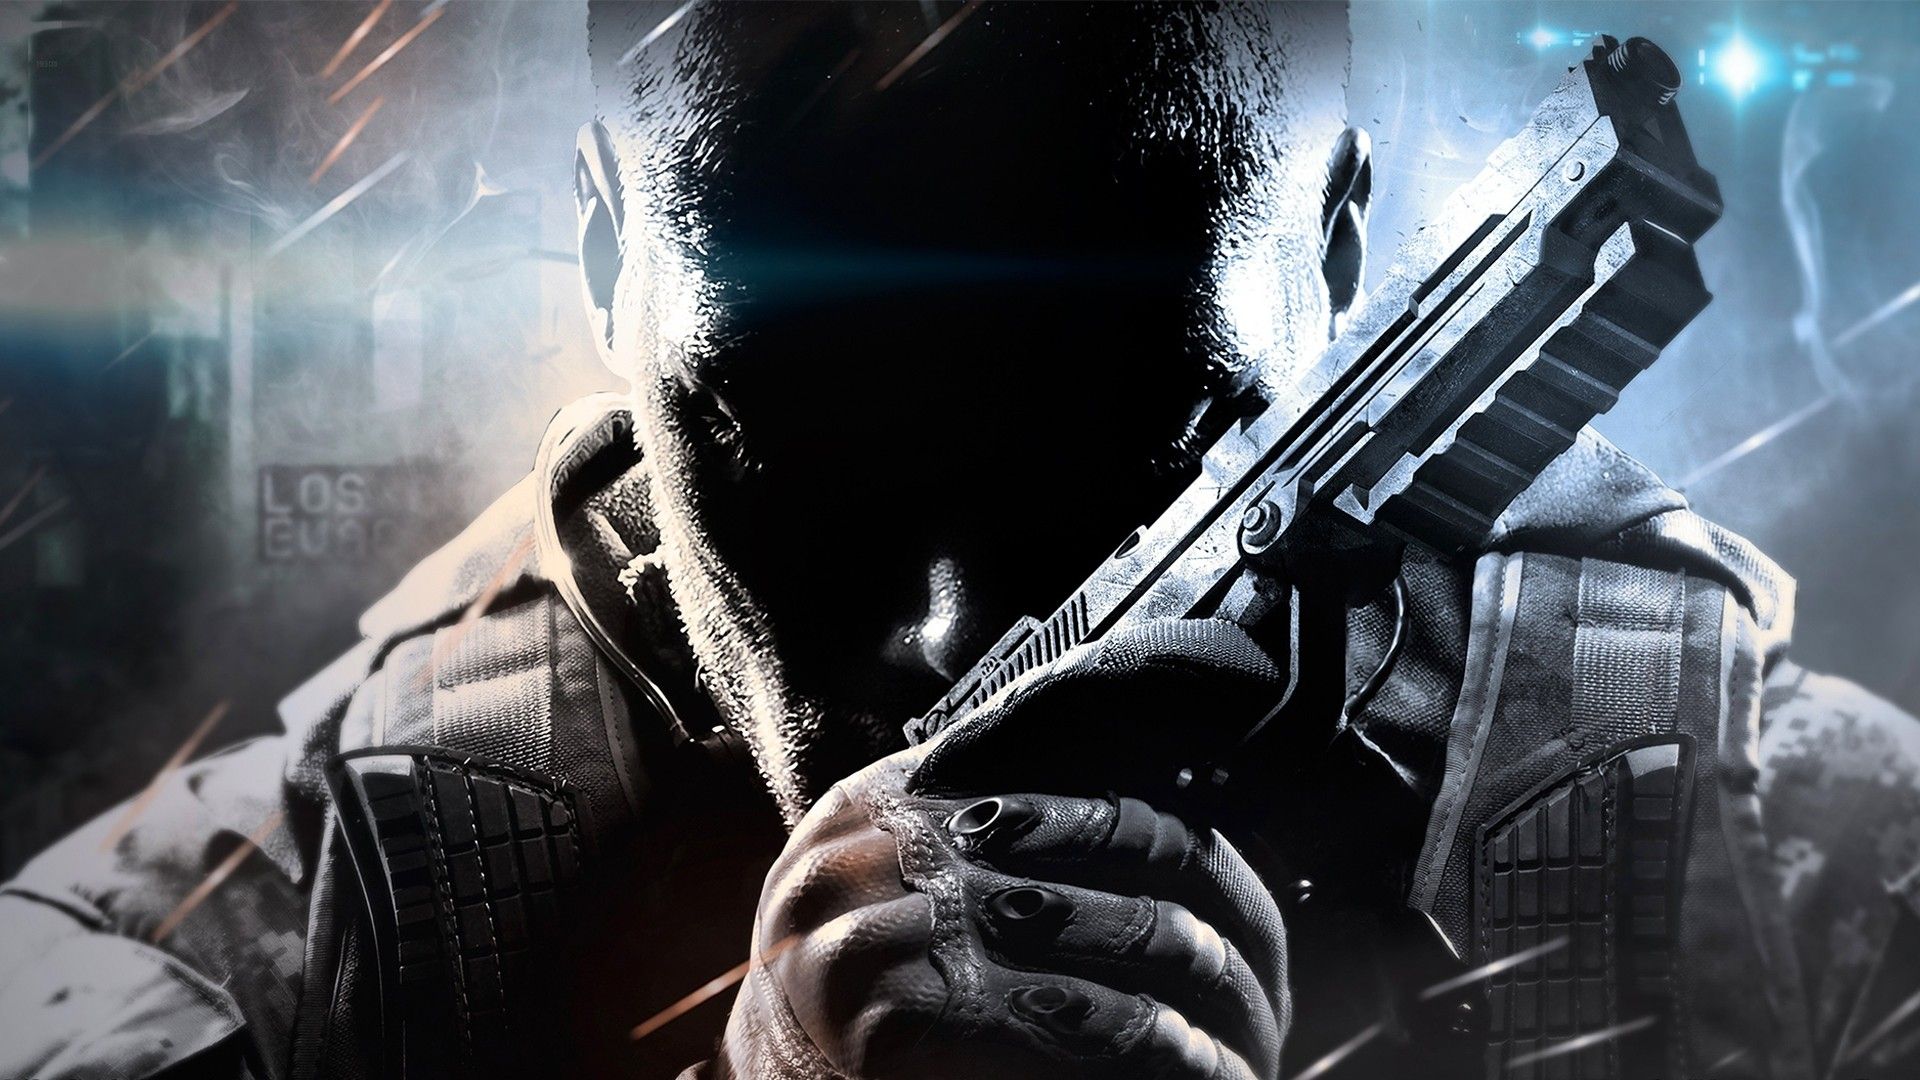 Black Ops 2 Wallpaper background picture